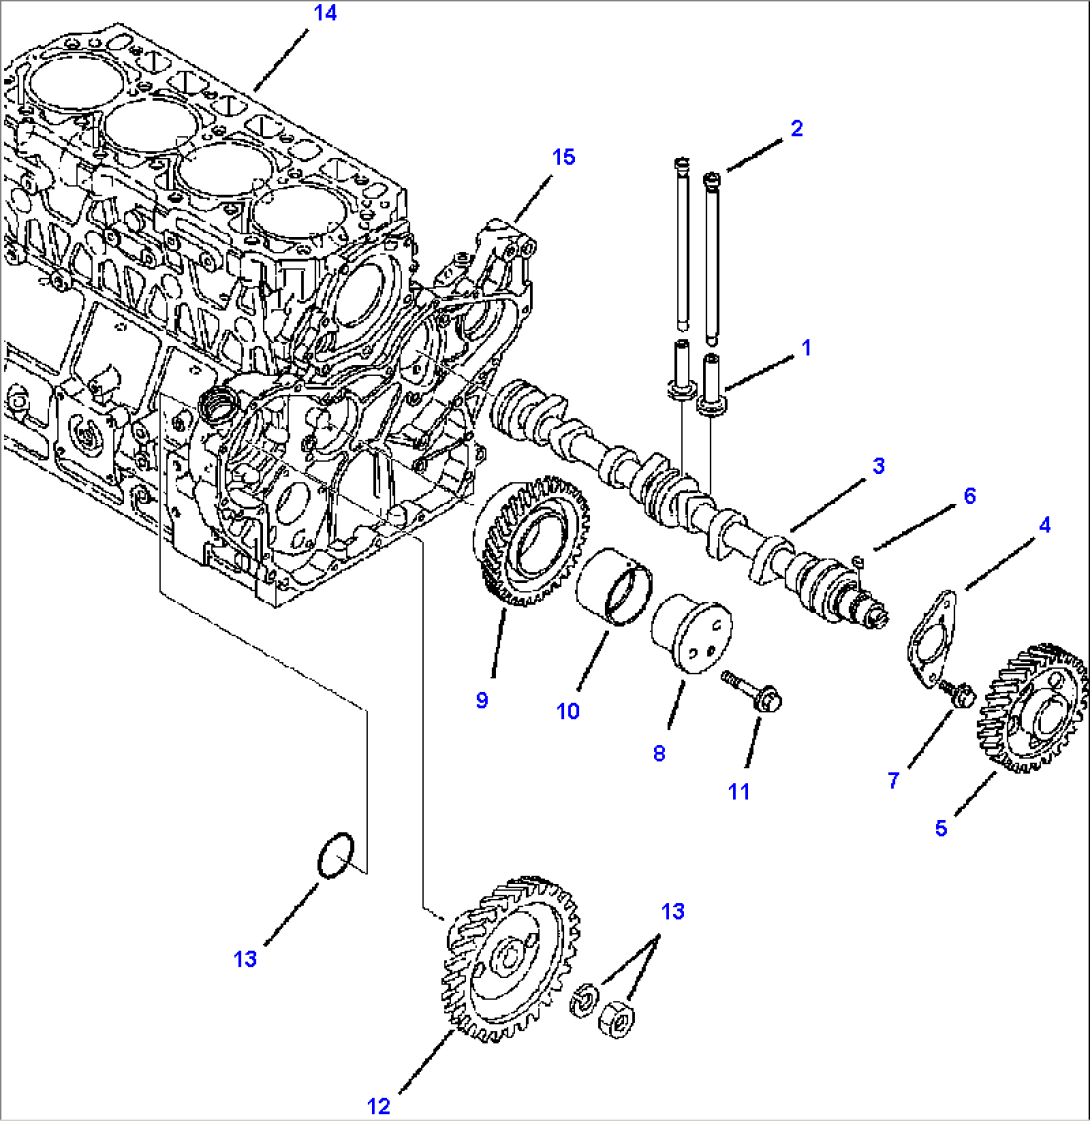 FIG. A0113-01A0 TIER I ENGINE - CAMSHAFT AND DRIVE GEAR